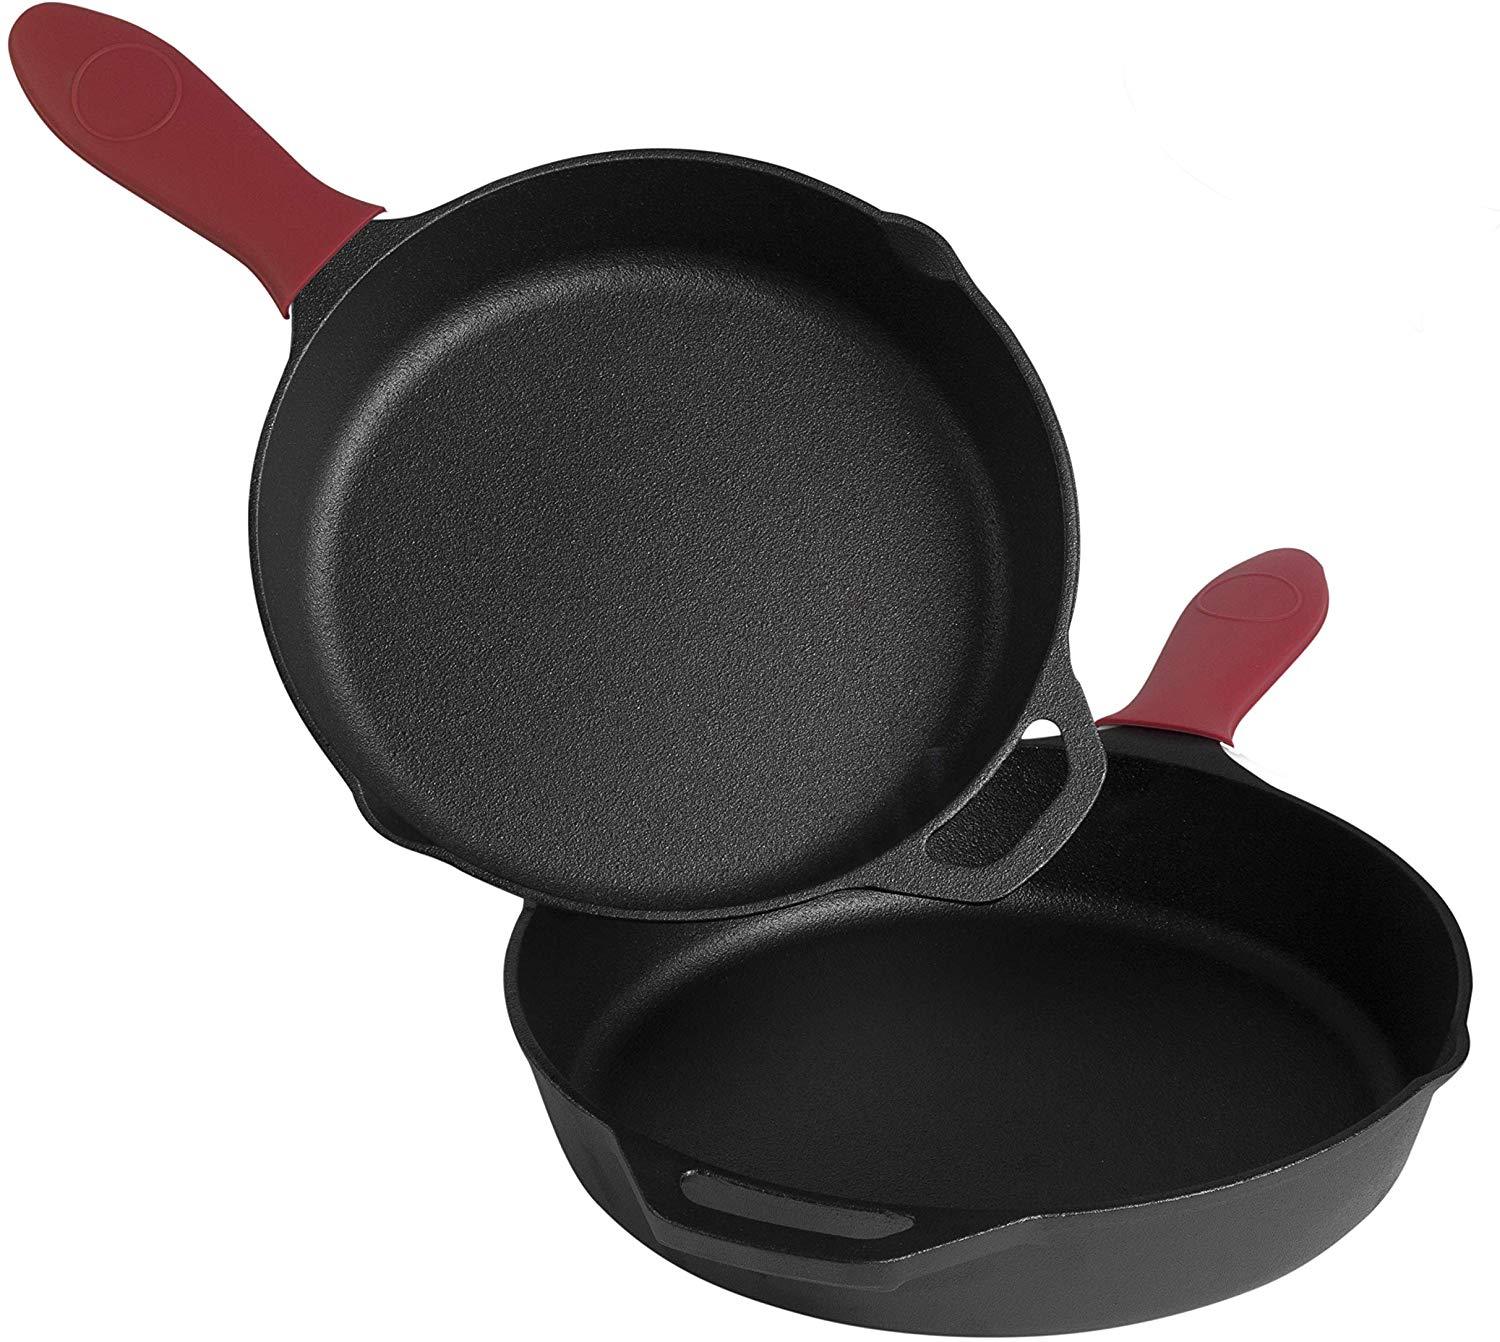 MEKBOK Cast Iron Skillet Set of 2 | Pre-seasoned 10 & 12 Inch Non-Stick Skillets | Multifunctional Pots for Frying, Cooking, Baking, Grilling |Use On Induction, Electric.